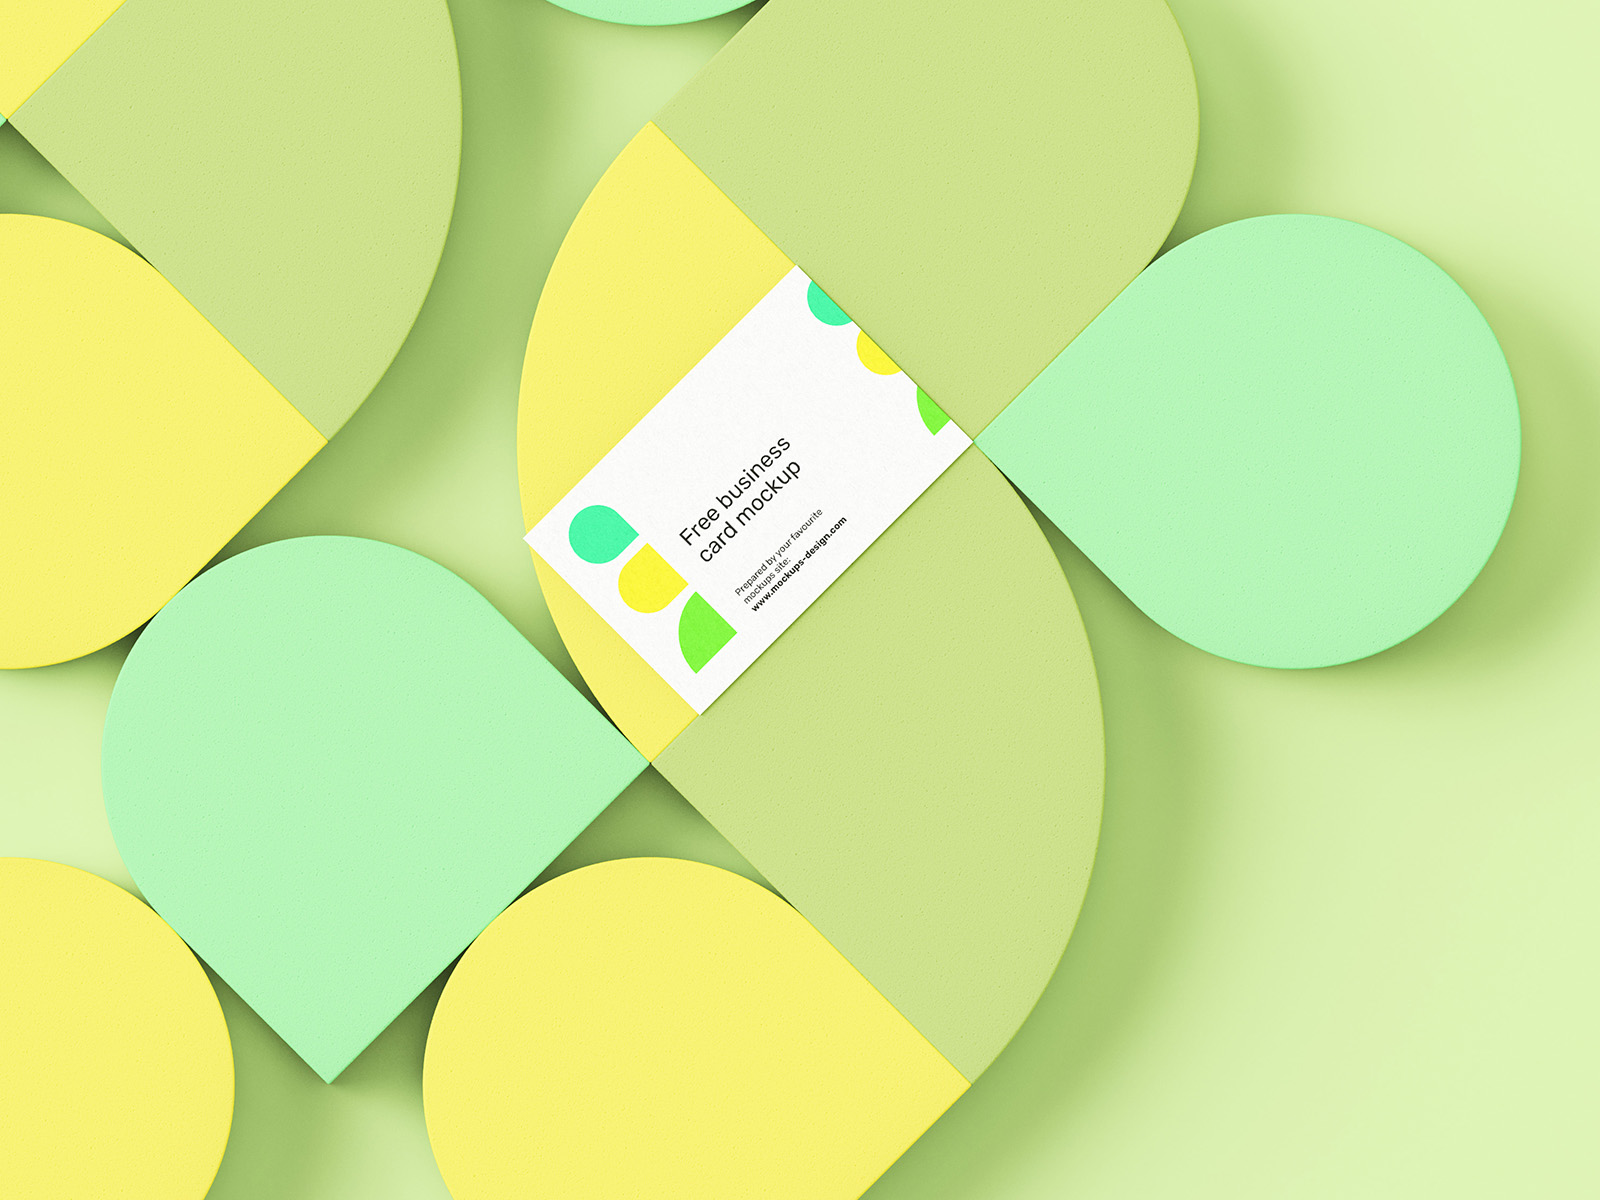 Abstract Business Card Mockup